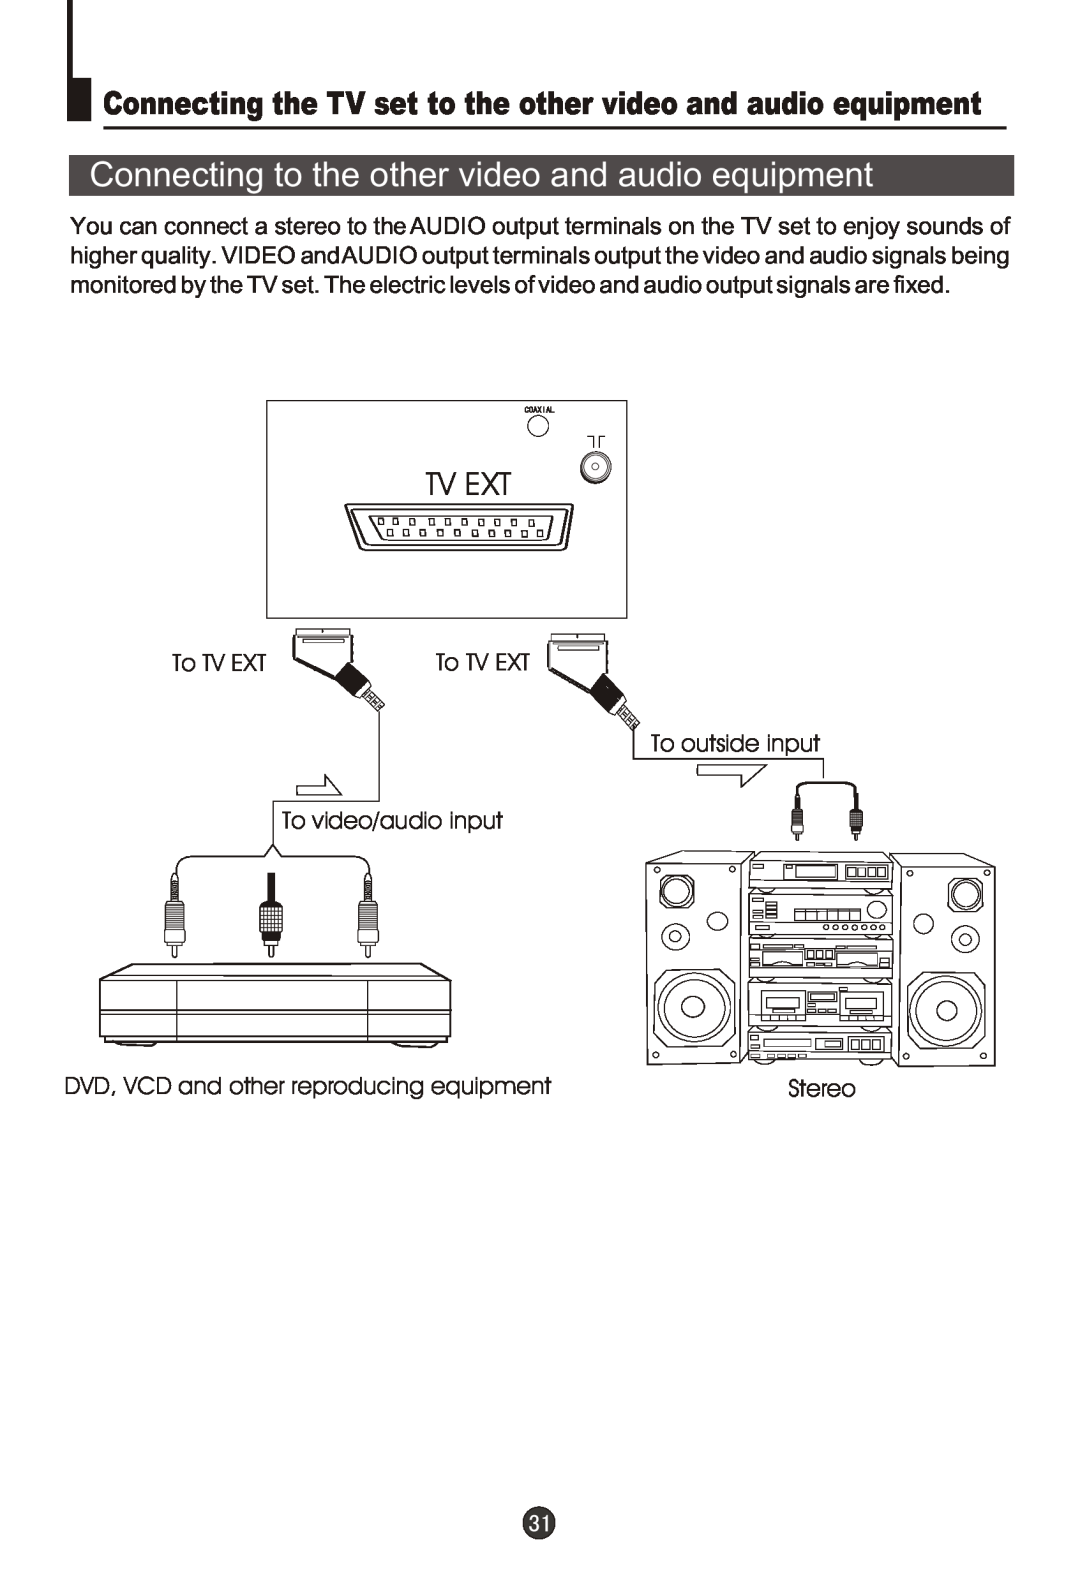 Haier DTA-2198PF owner manual Connecting to the other video and audio equipment, Tv Ext, Stereo 